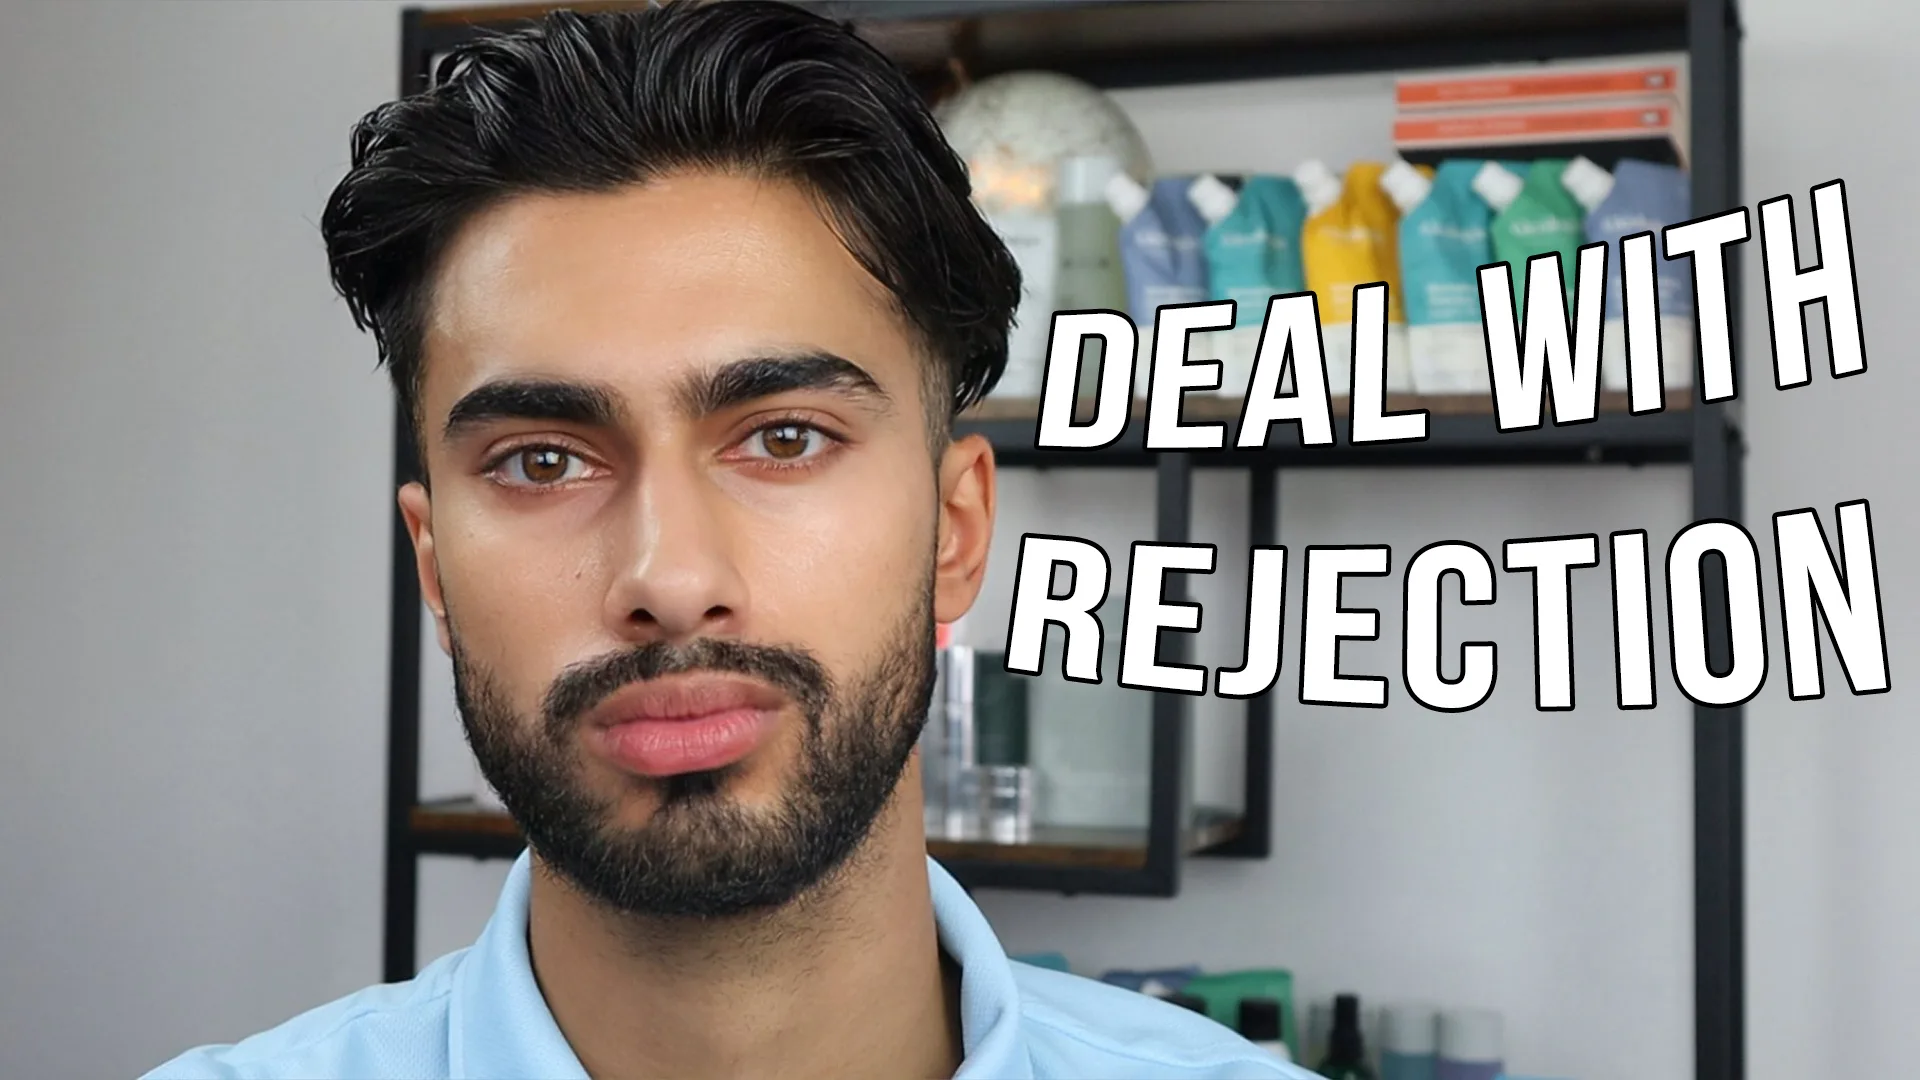 7 Tips to Deal with Rejection